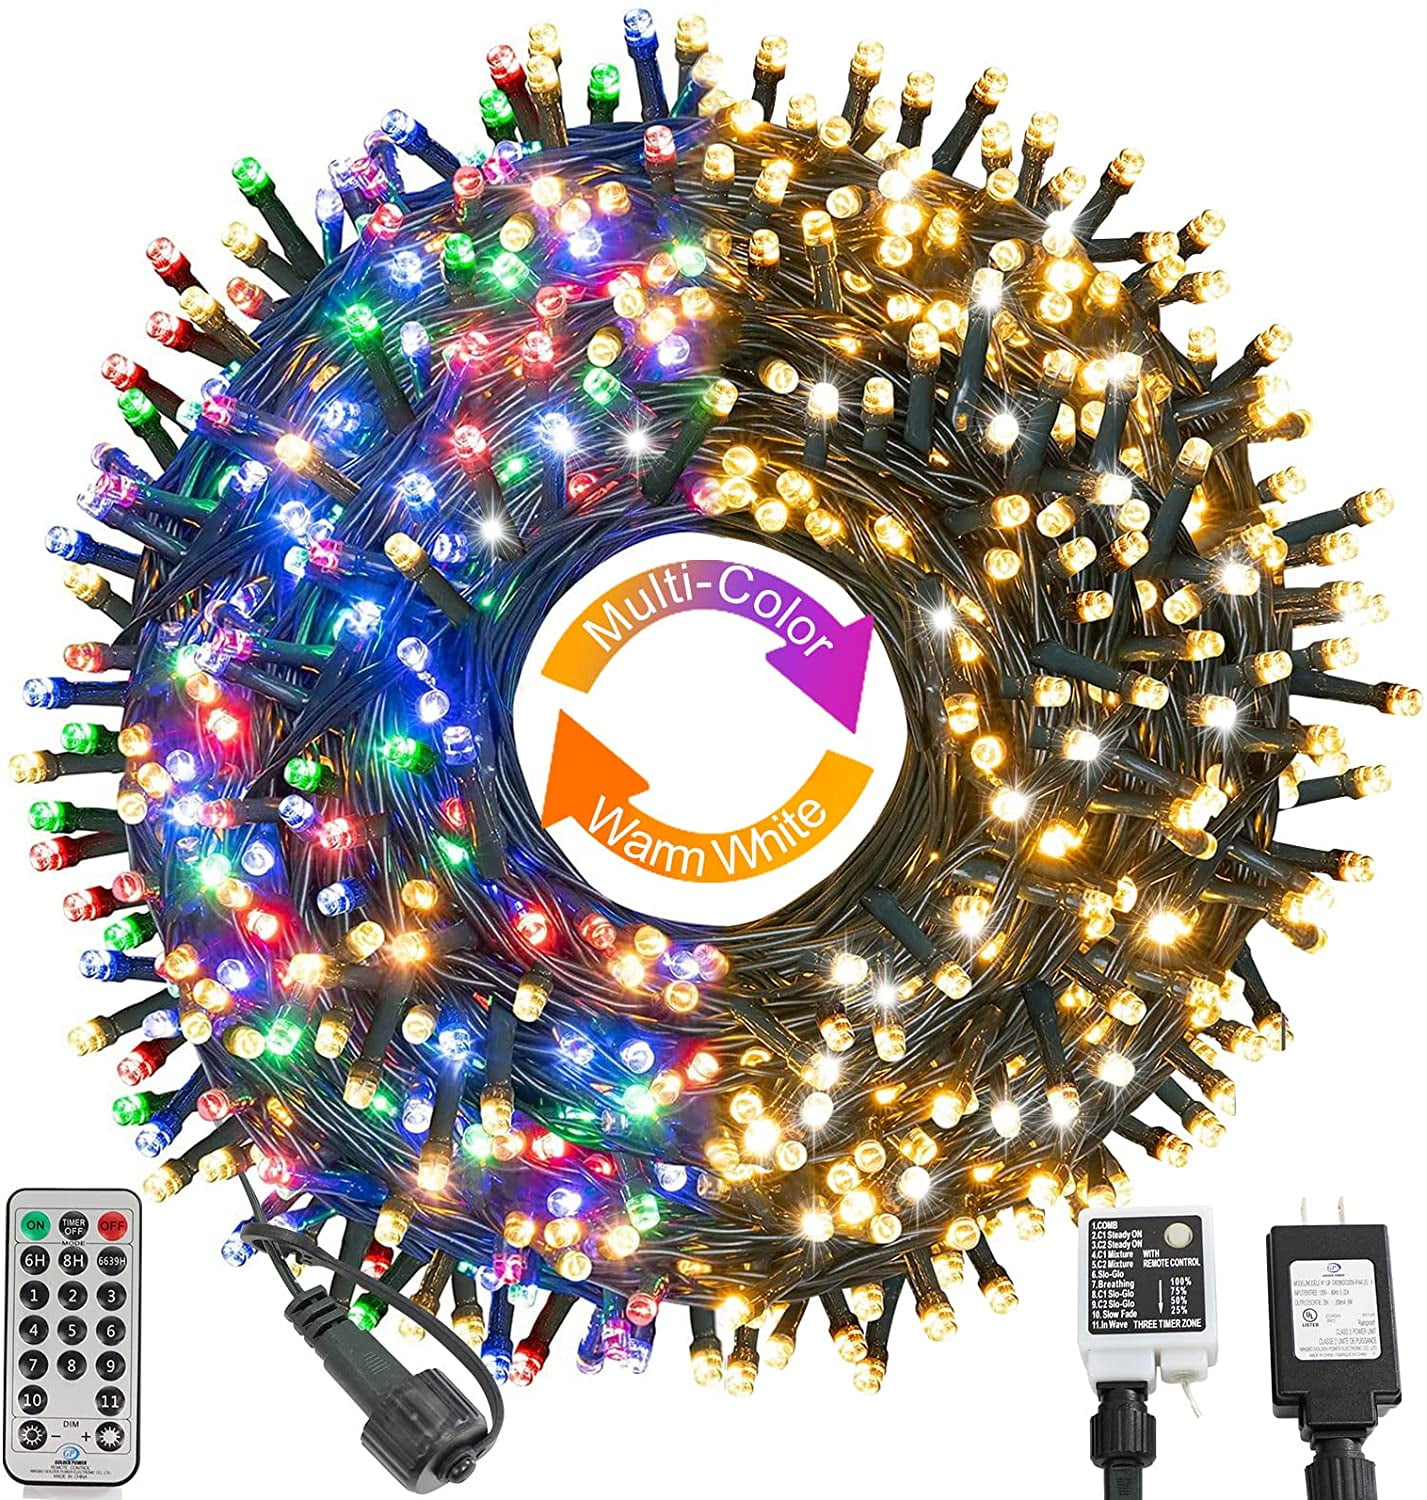 Outdoor Joomer Color Changing Christmas String Lights Warm White to Multicolor 98ft 300 LED 11 Modes Timer with Remote Connectable Christmas Decorations for Indoor Tree Yard 